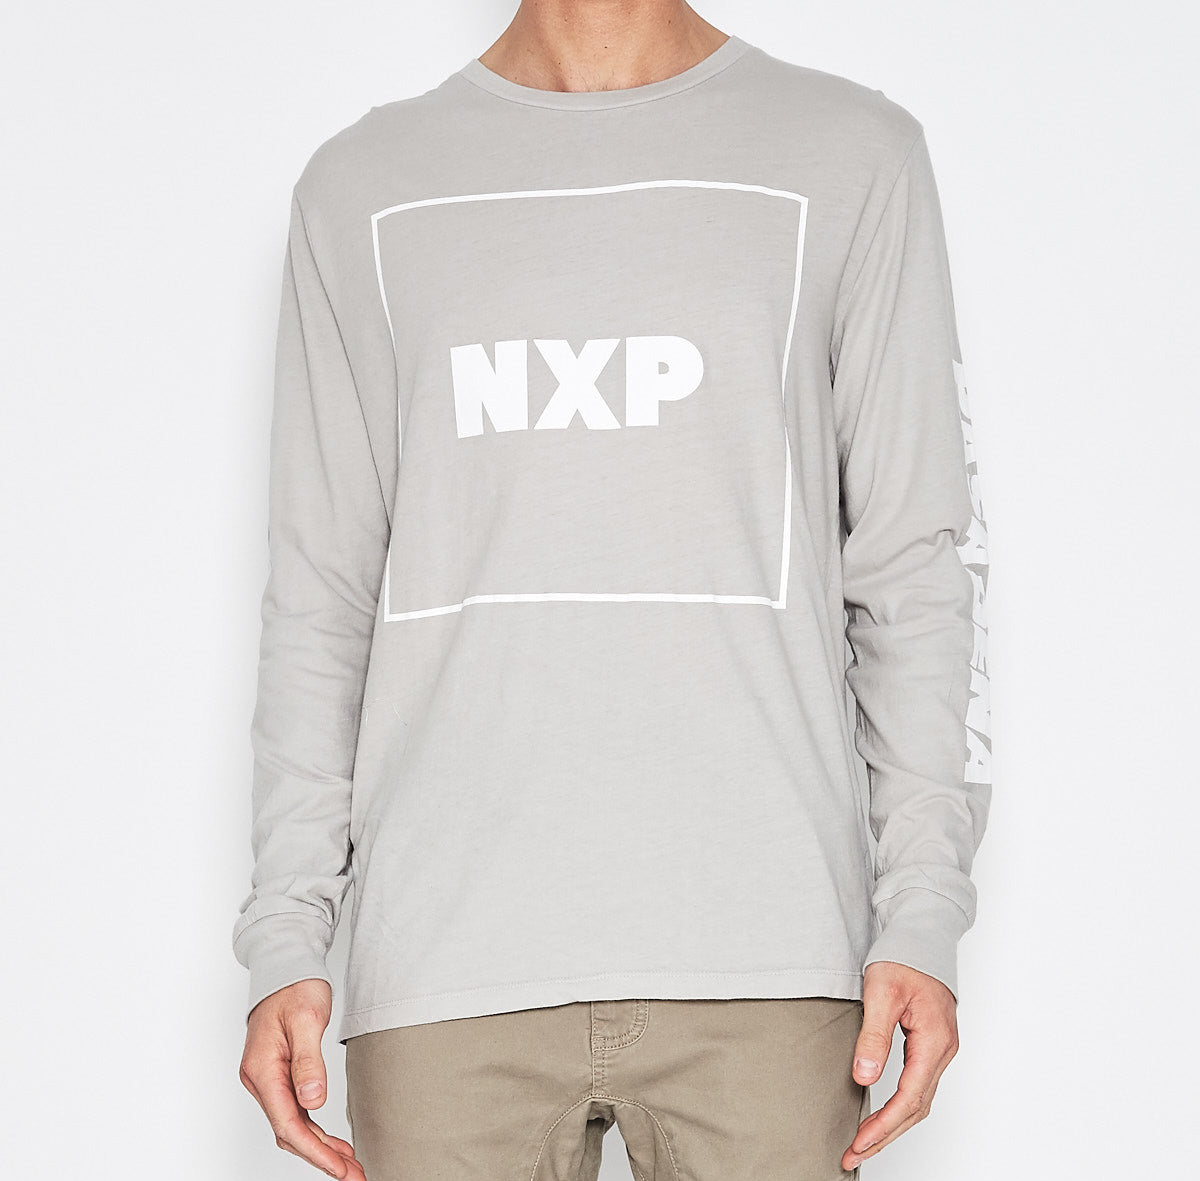 NxP Protect Longsleeve - Forestwood Co